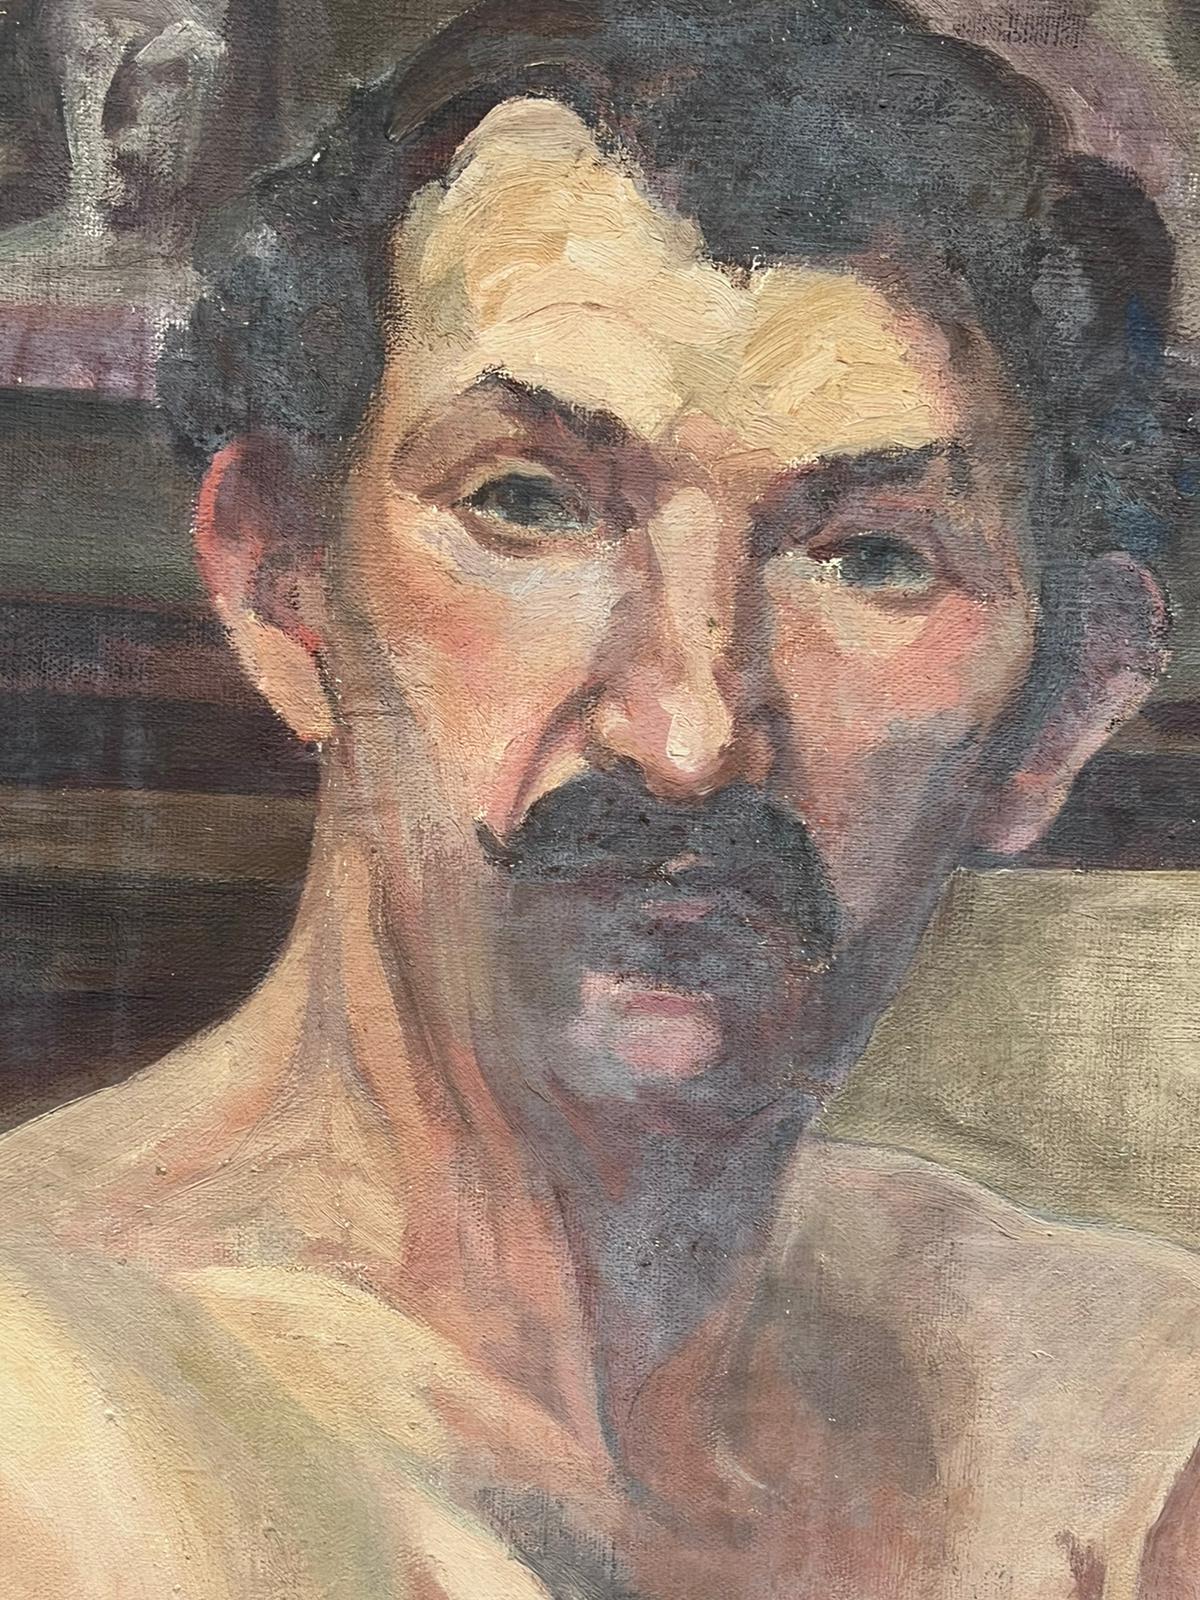 The Nude Man with a Moustache
by Louise Alix (French, 1888-1980) *see notes below
atelier stamped verso
oil painting on canvas unframed
measures: 20.5 inches high by 22.5 inches wide
condition: overall very good and sound, a few scuffs and marks to